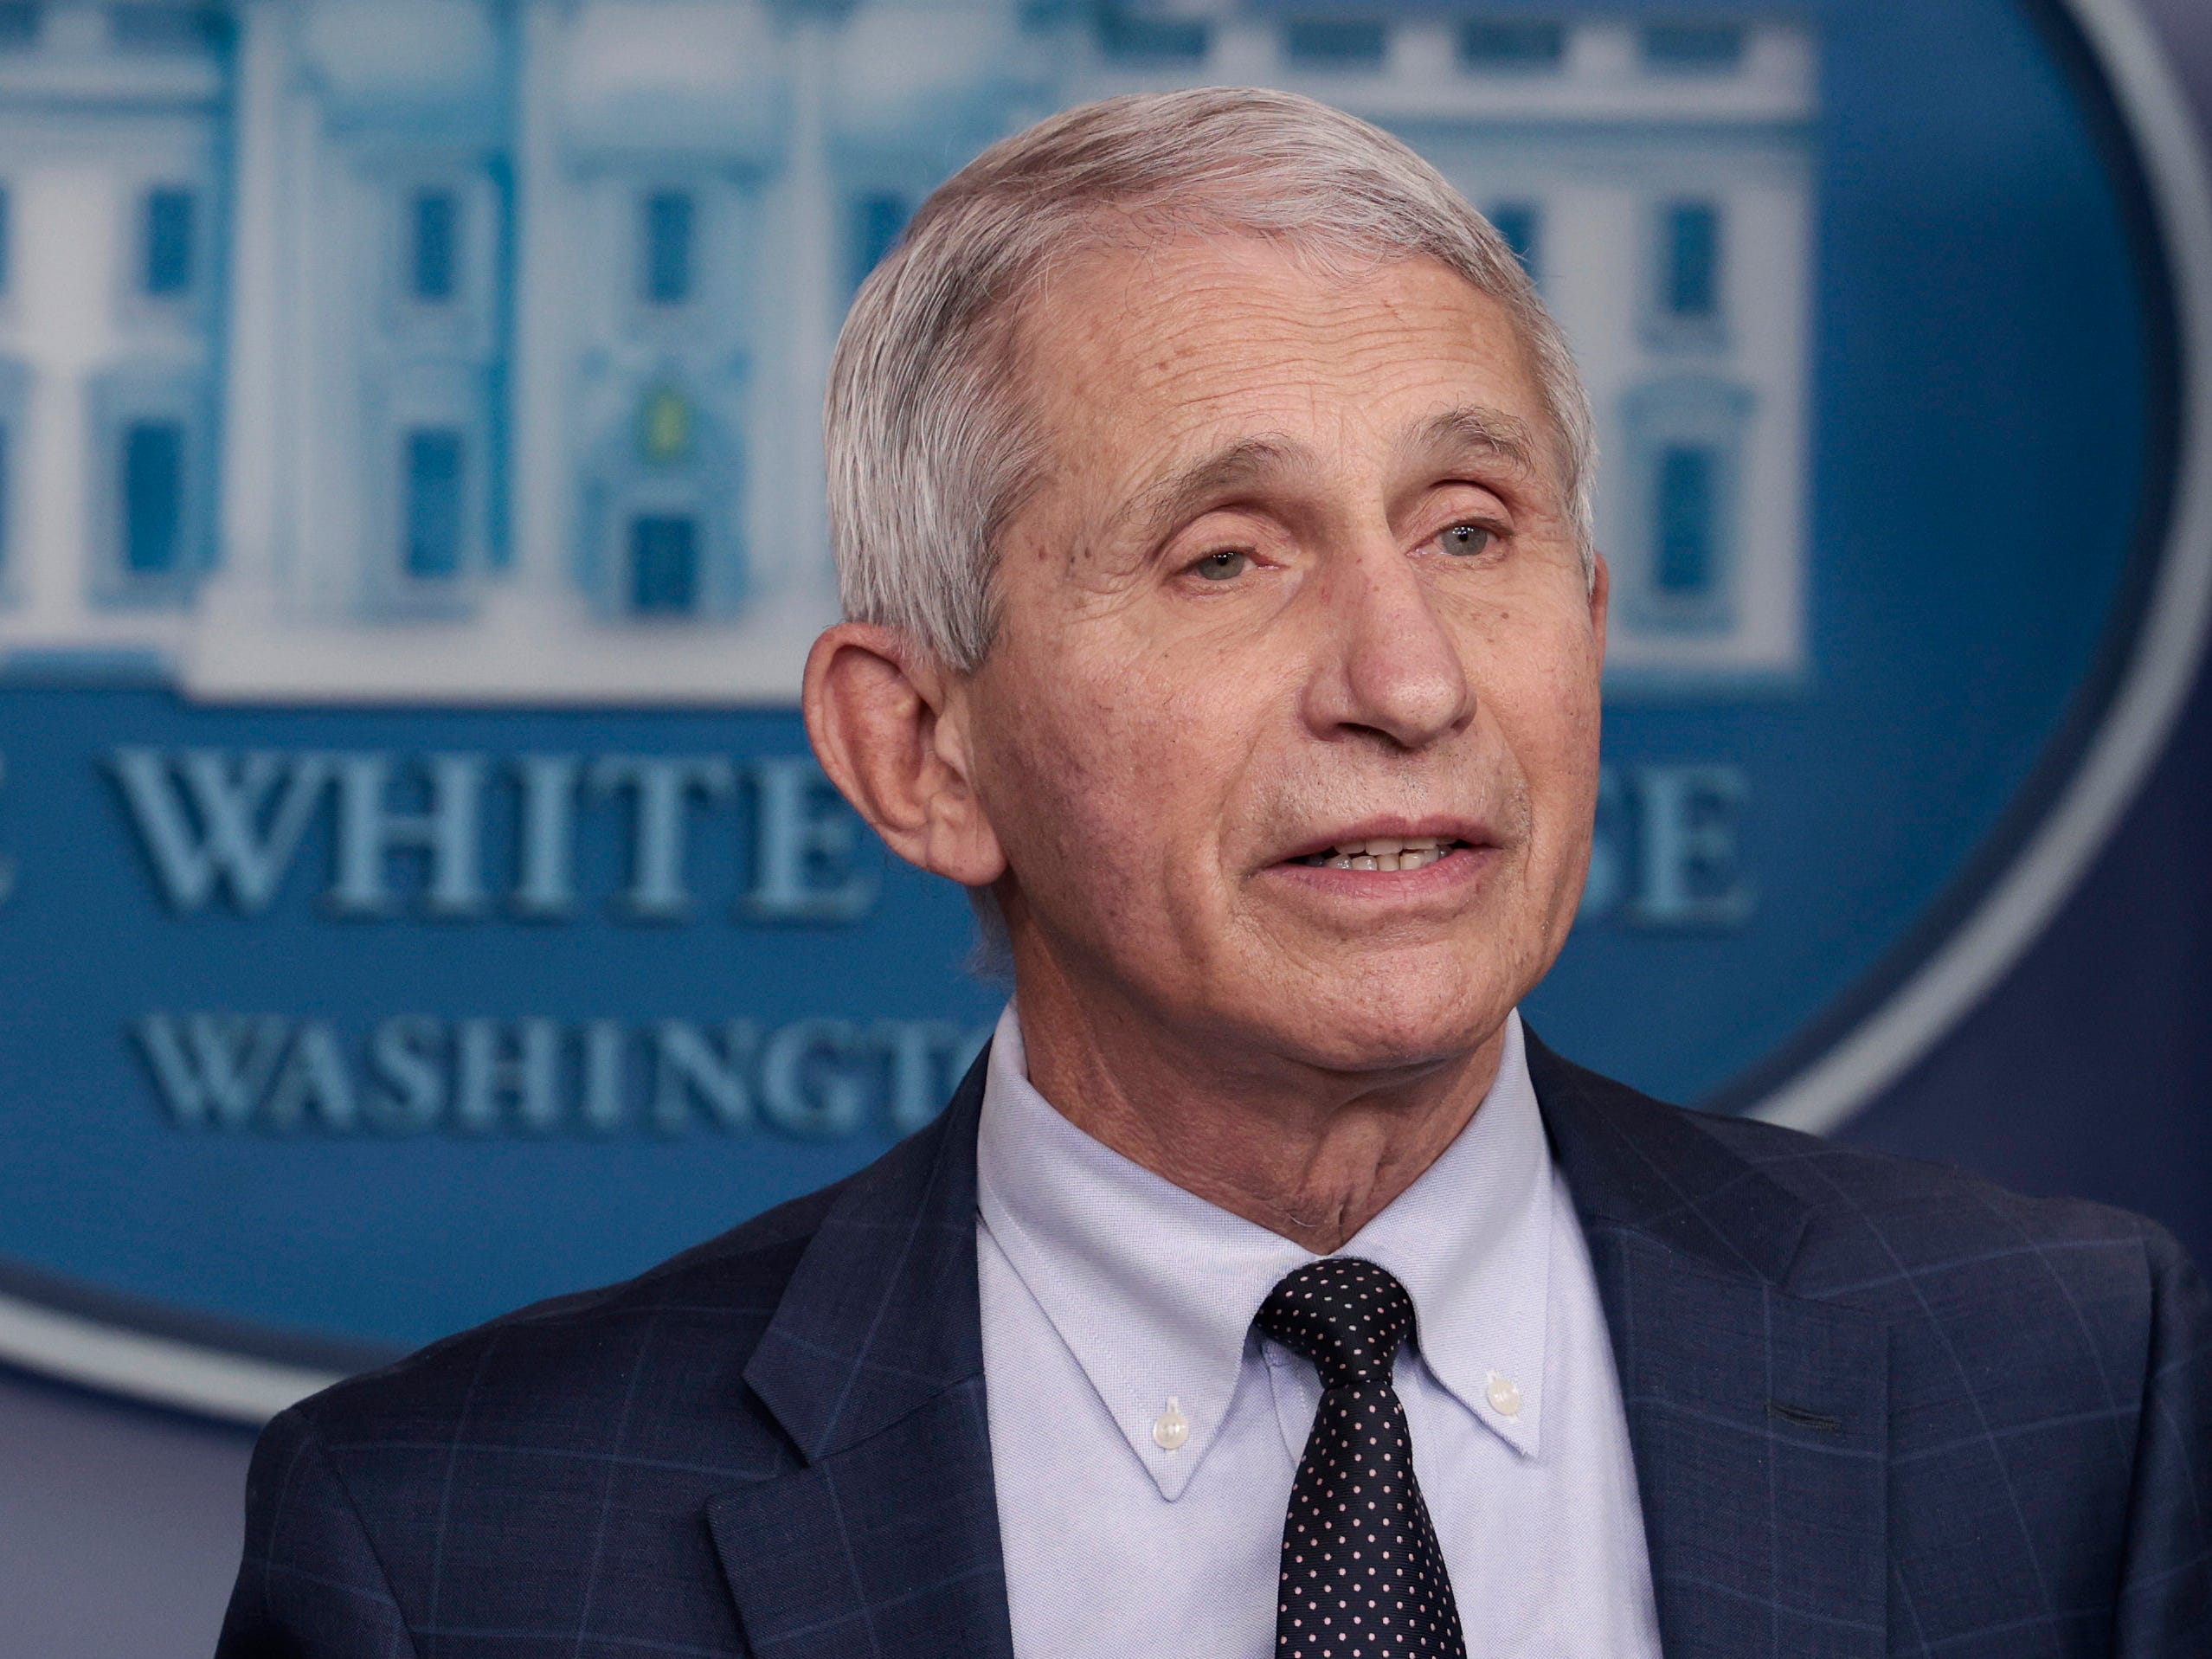 Dr. Anthony Fauci, Director of the National Institute of Allergy and Infectious Diseases and the Chief Medical Advisor to the President, gives an update on the Omicron COVID-19 variant during the daily press briefing at the White House on December 01, 2021 in Washington, DC.